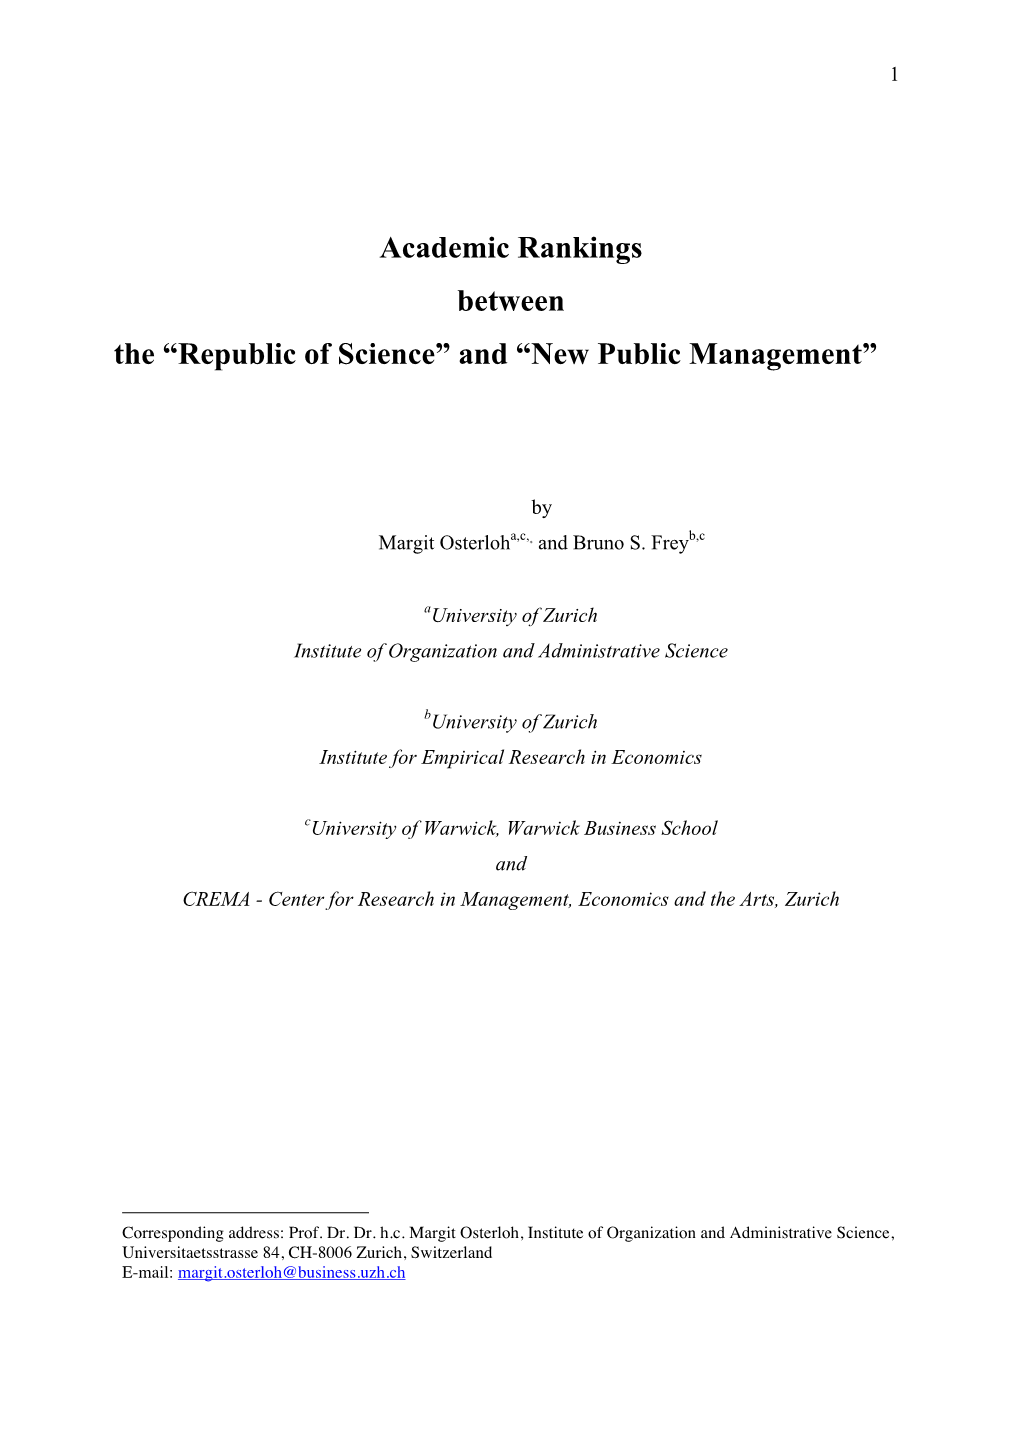 Academic Rankings Between the “Republic of Science” and “New Public Management”